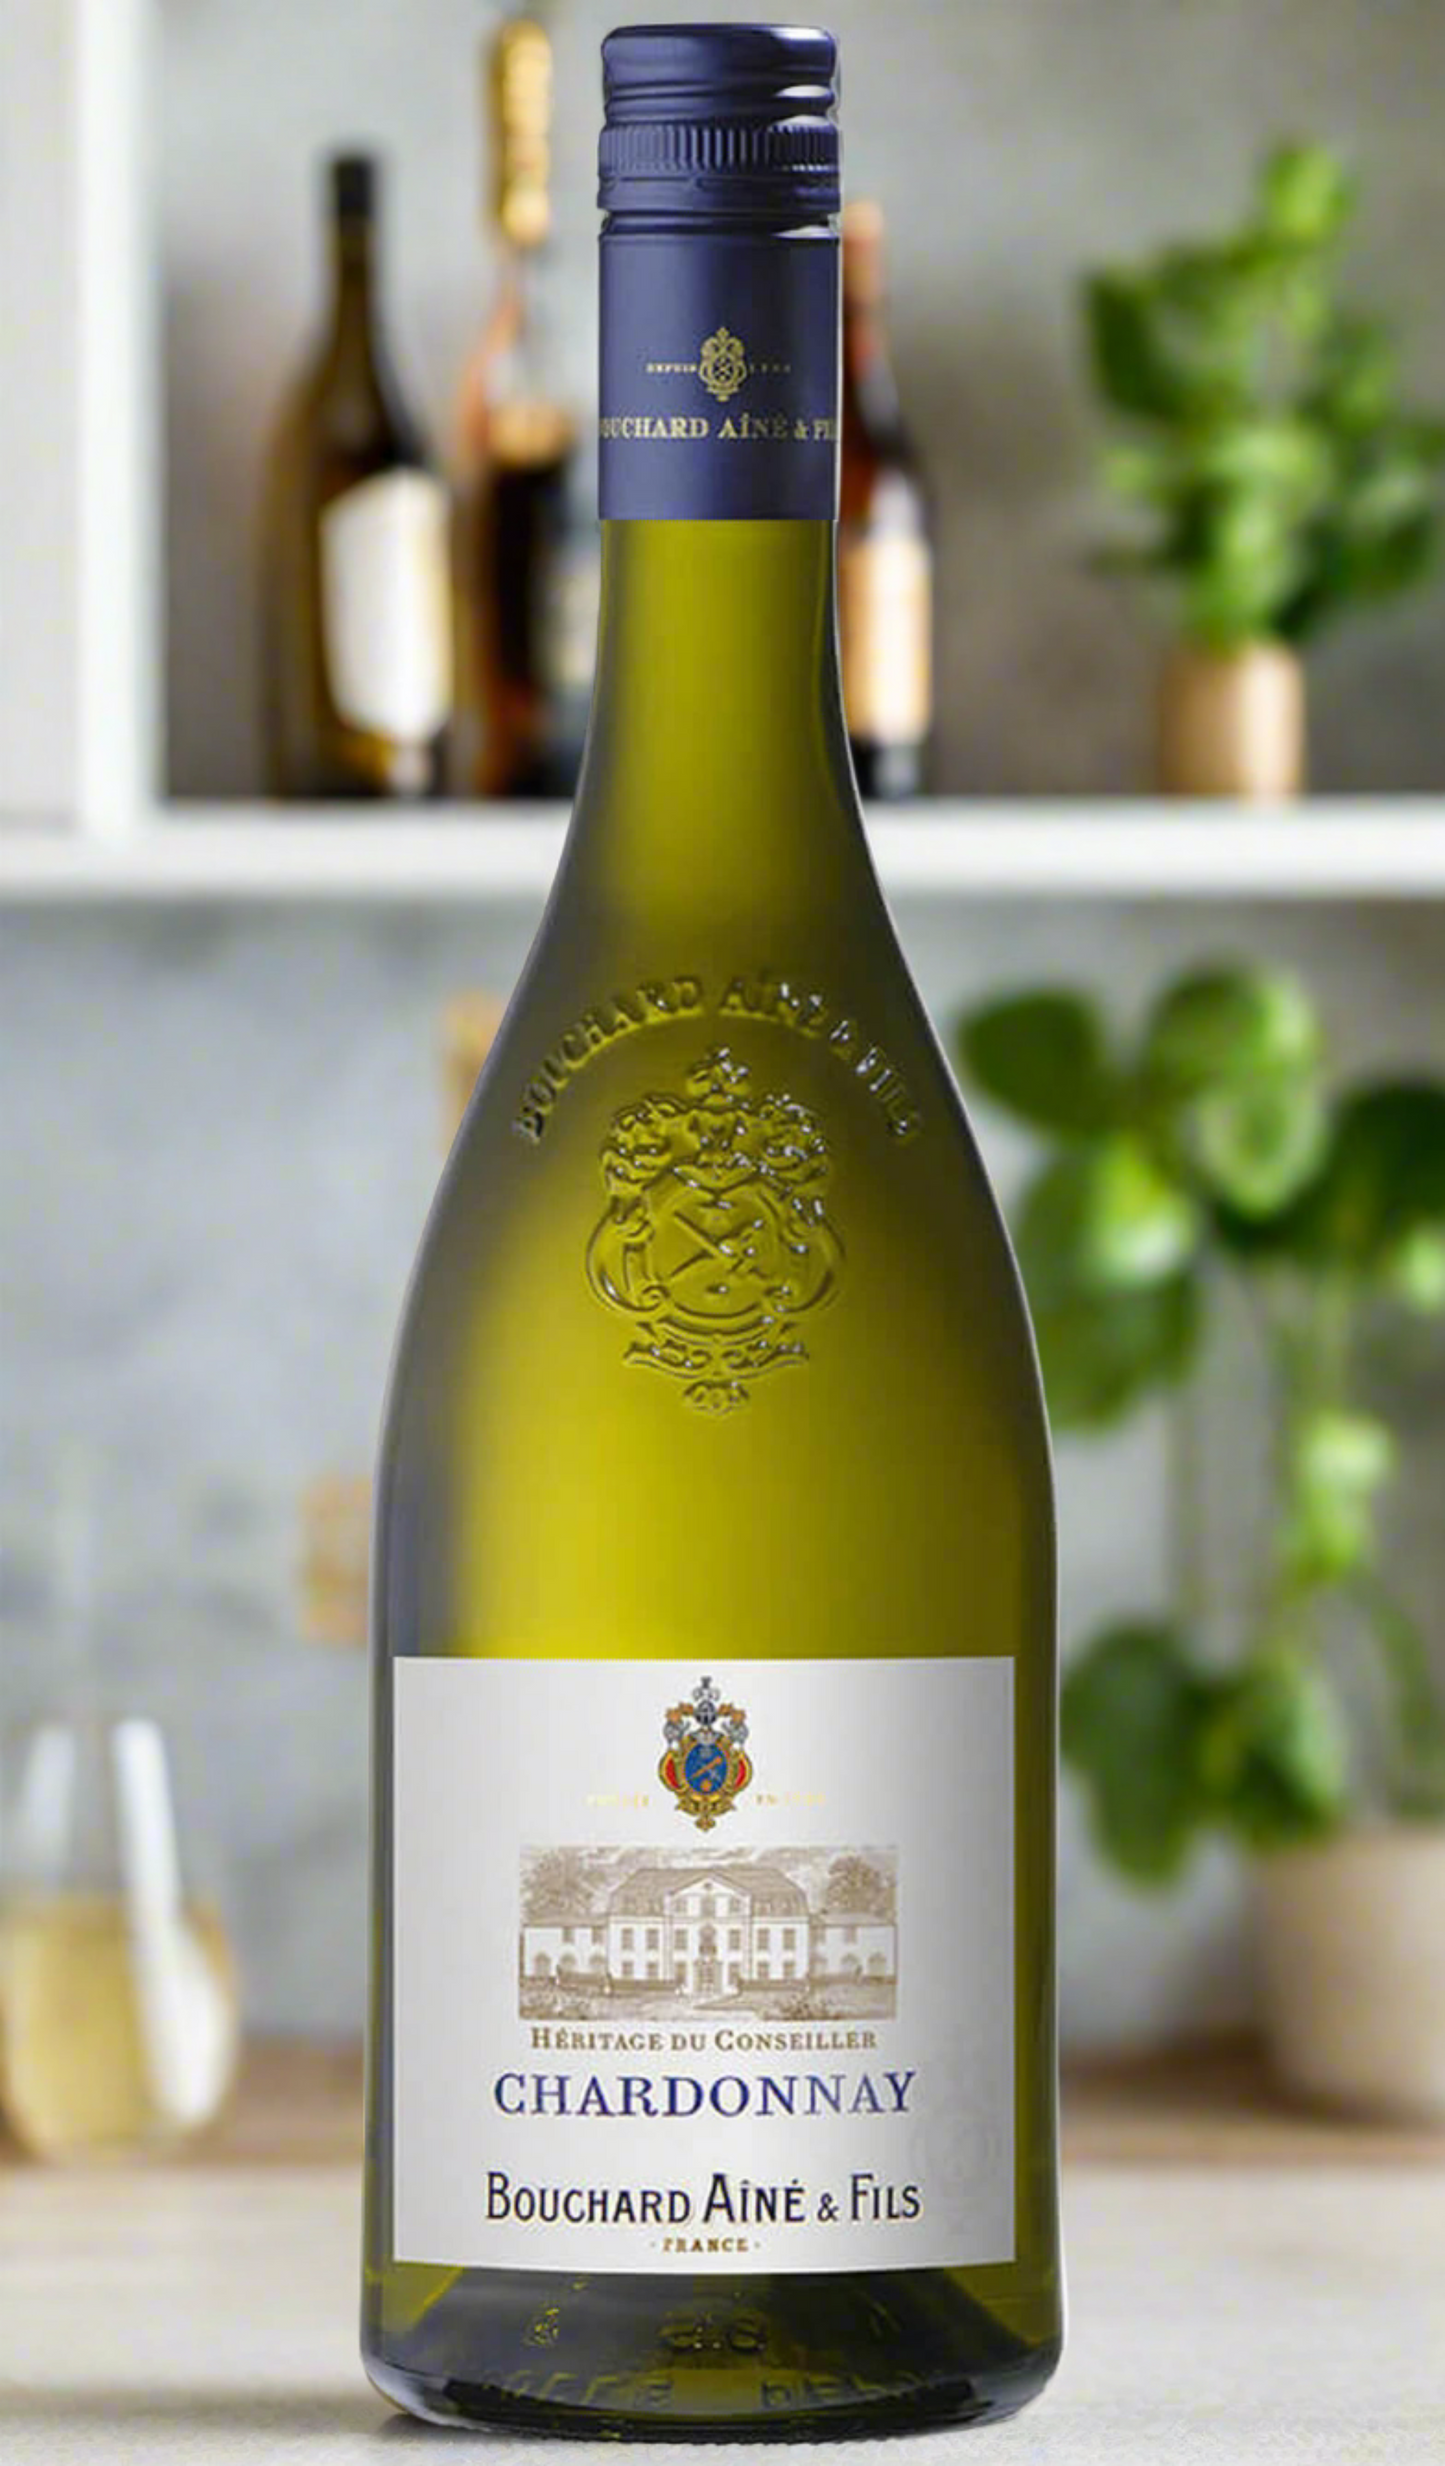 Find out more or buy Bouchard Aine & Fils 'Heritage du Conseiller' Chardonnay 2023 online at Wine Sellers Direct - Australia’s independent liquor specialists.